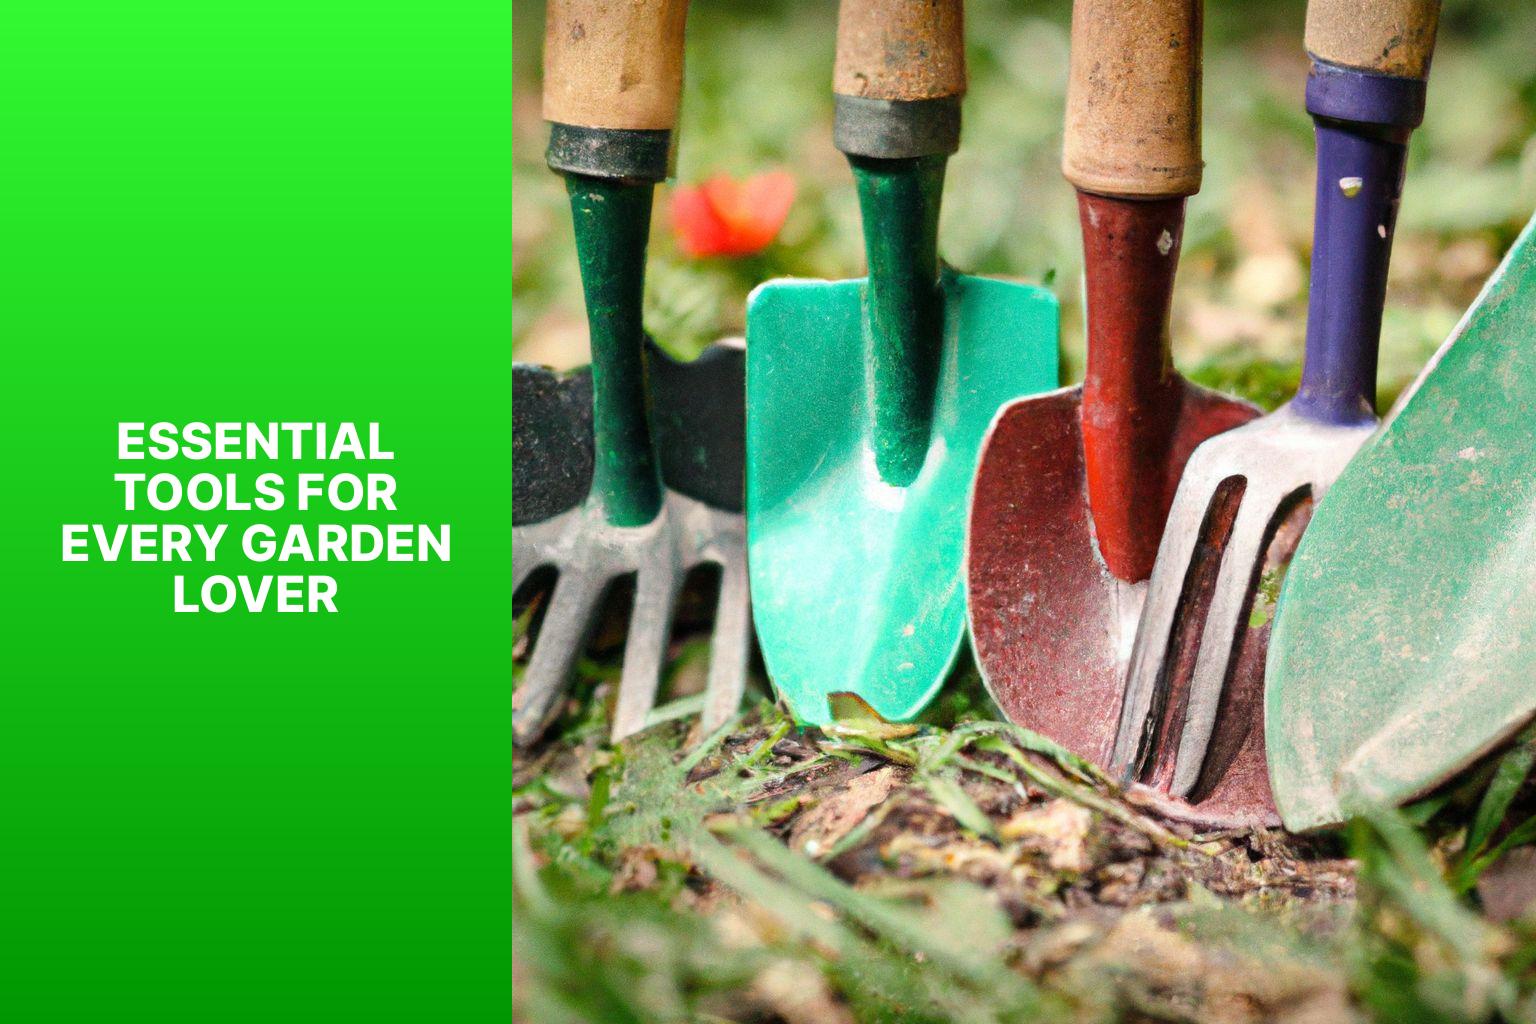 Essential Tools for Every Garden Lover - The tools every garden lover needs 